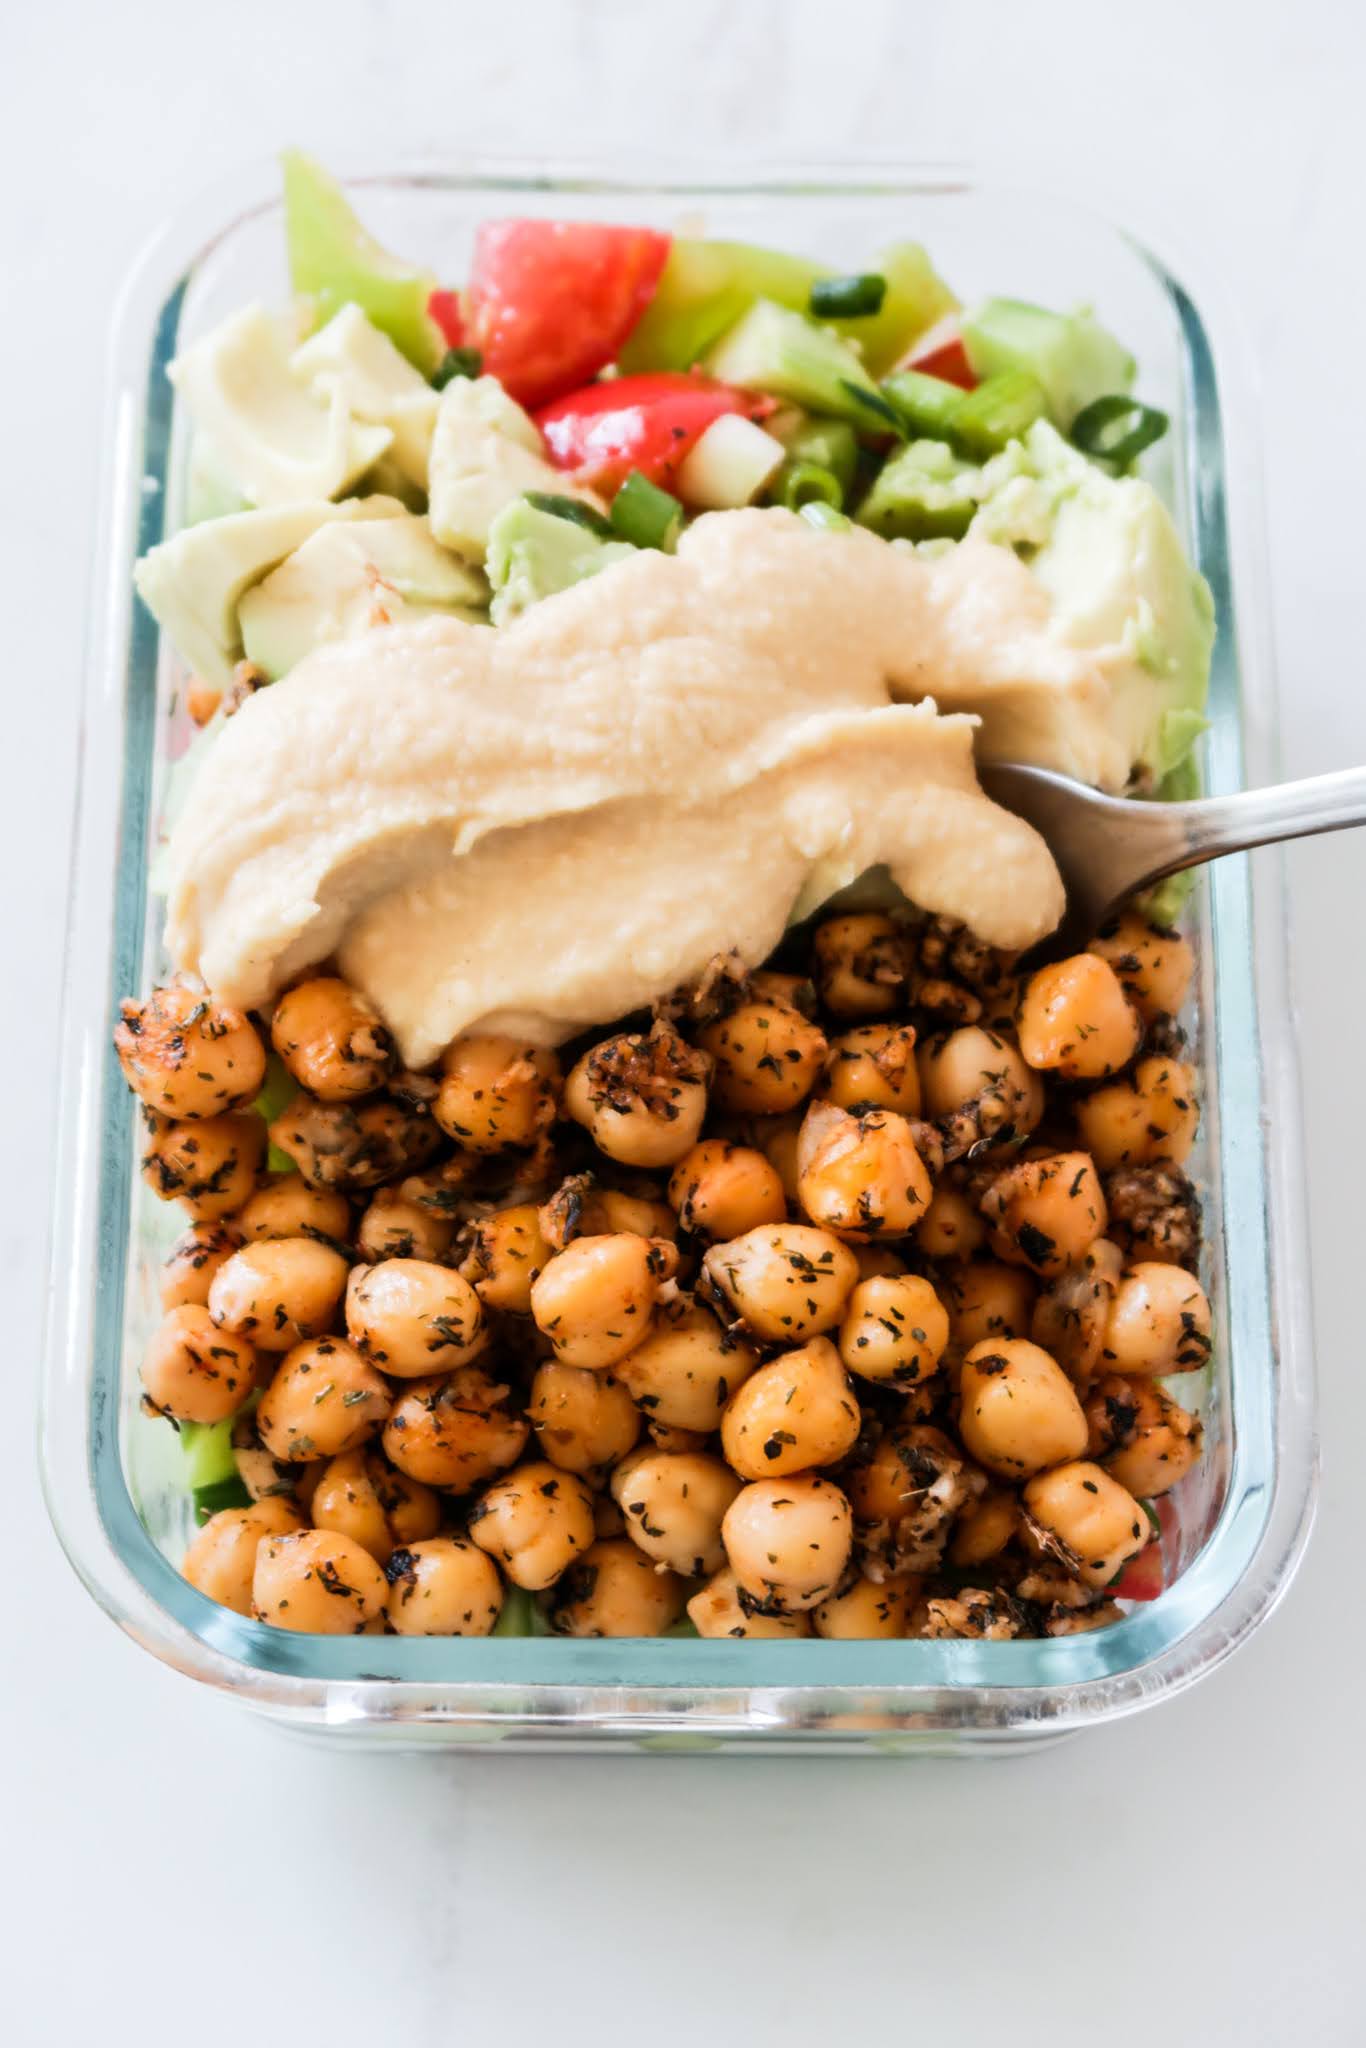 spicy mediterranean lunch bowls with chickpeas, hummus, avocado and cabbage salad